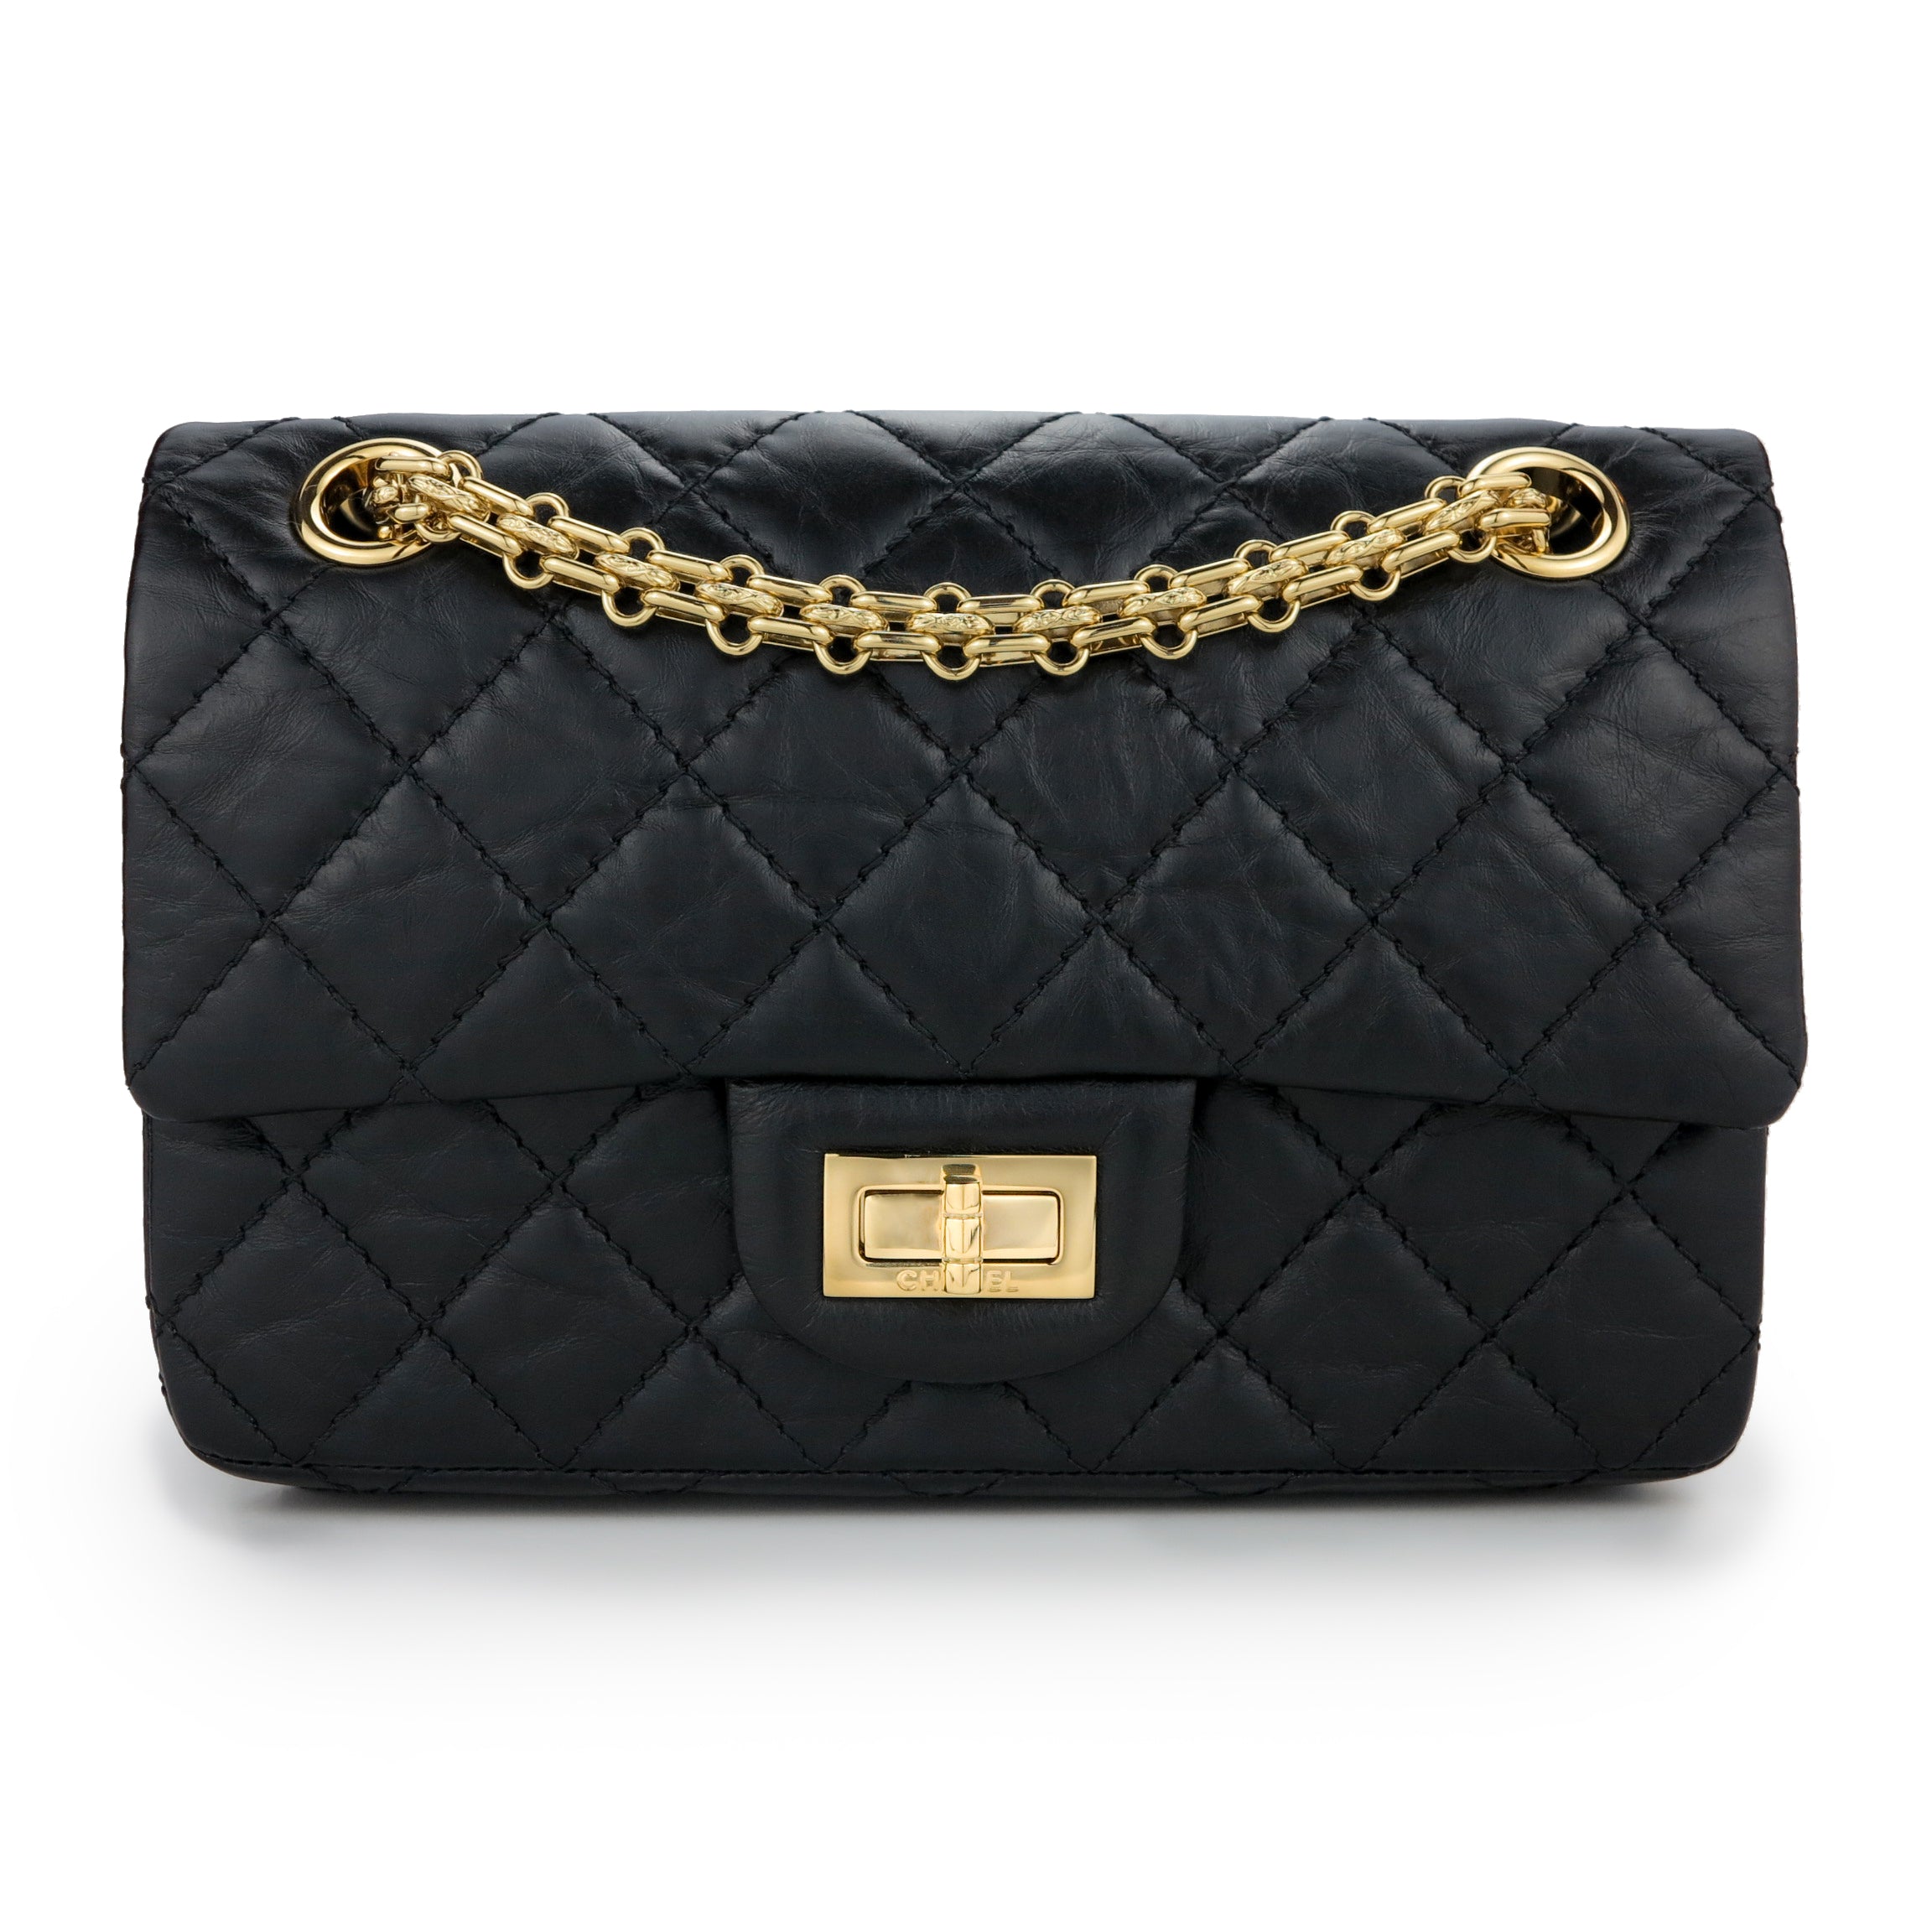 CHANEL Bags & Handbags for Women, Authenticity Guaranteed